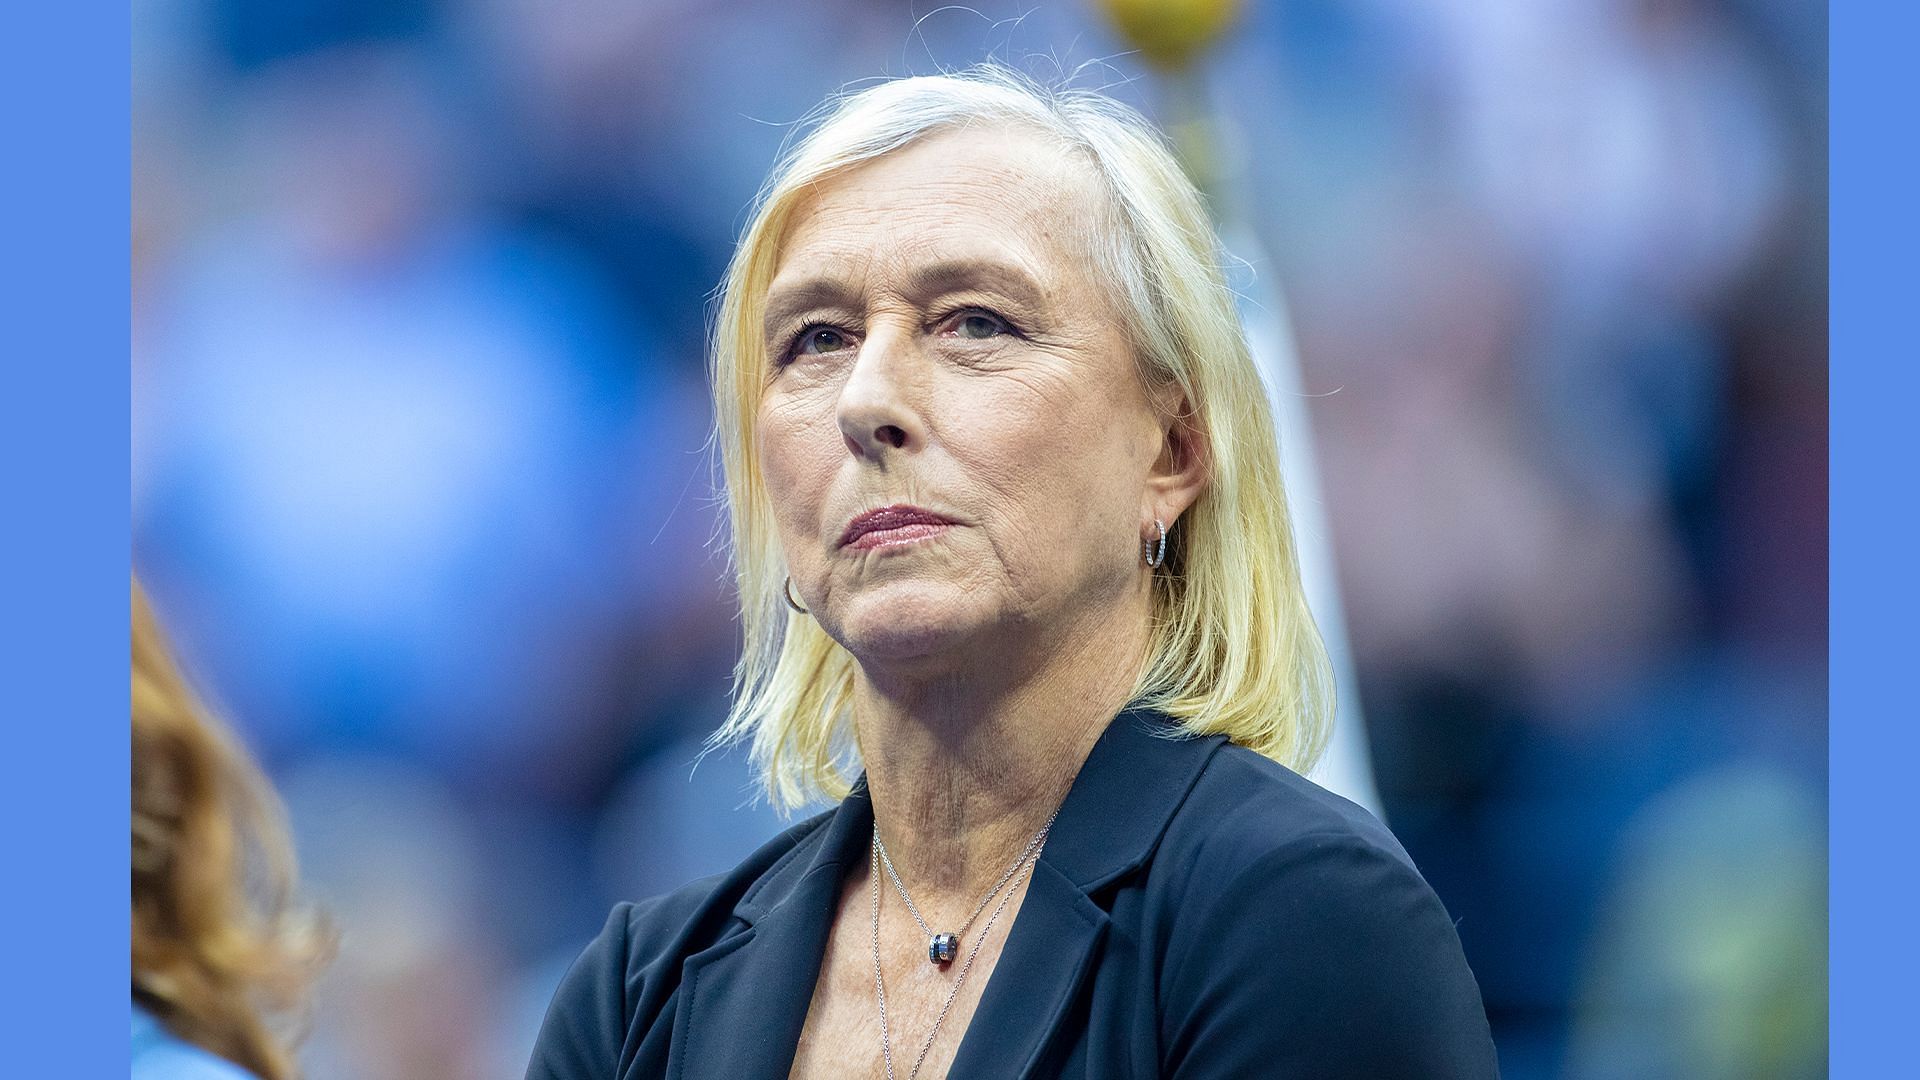 Martina Navratilova slams both Hamas and Israeli Prime Minister for their approach towards Israel-Palestine conflict